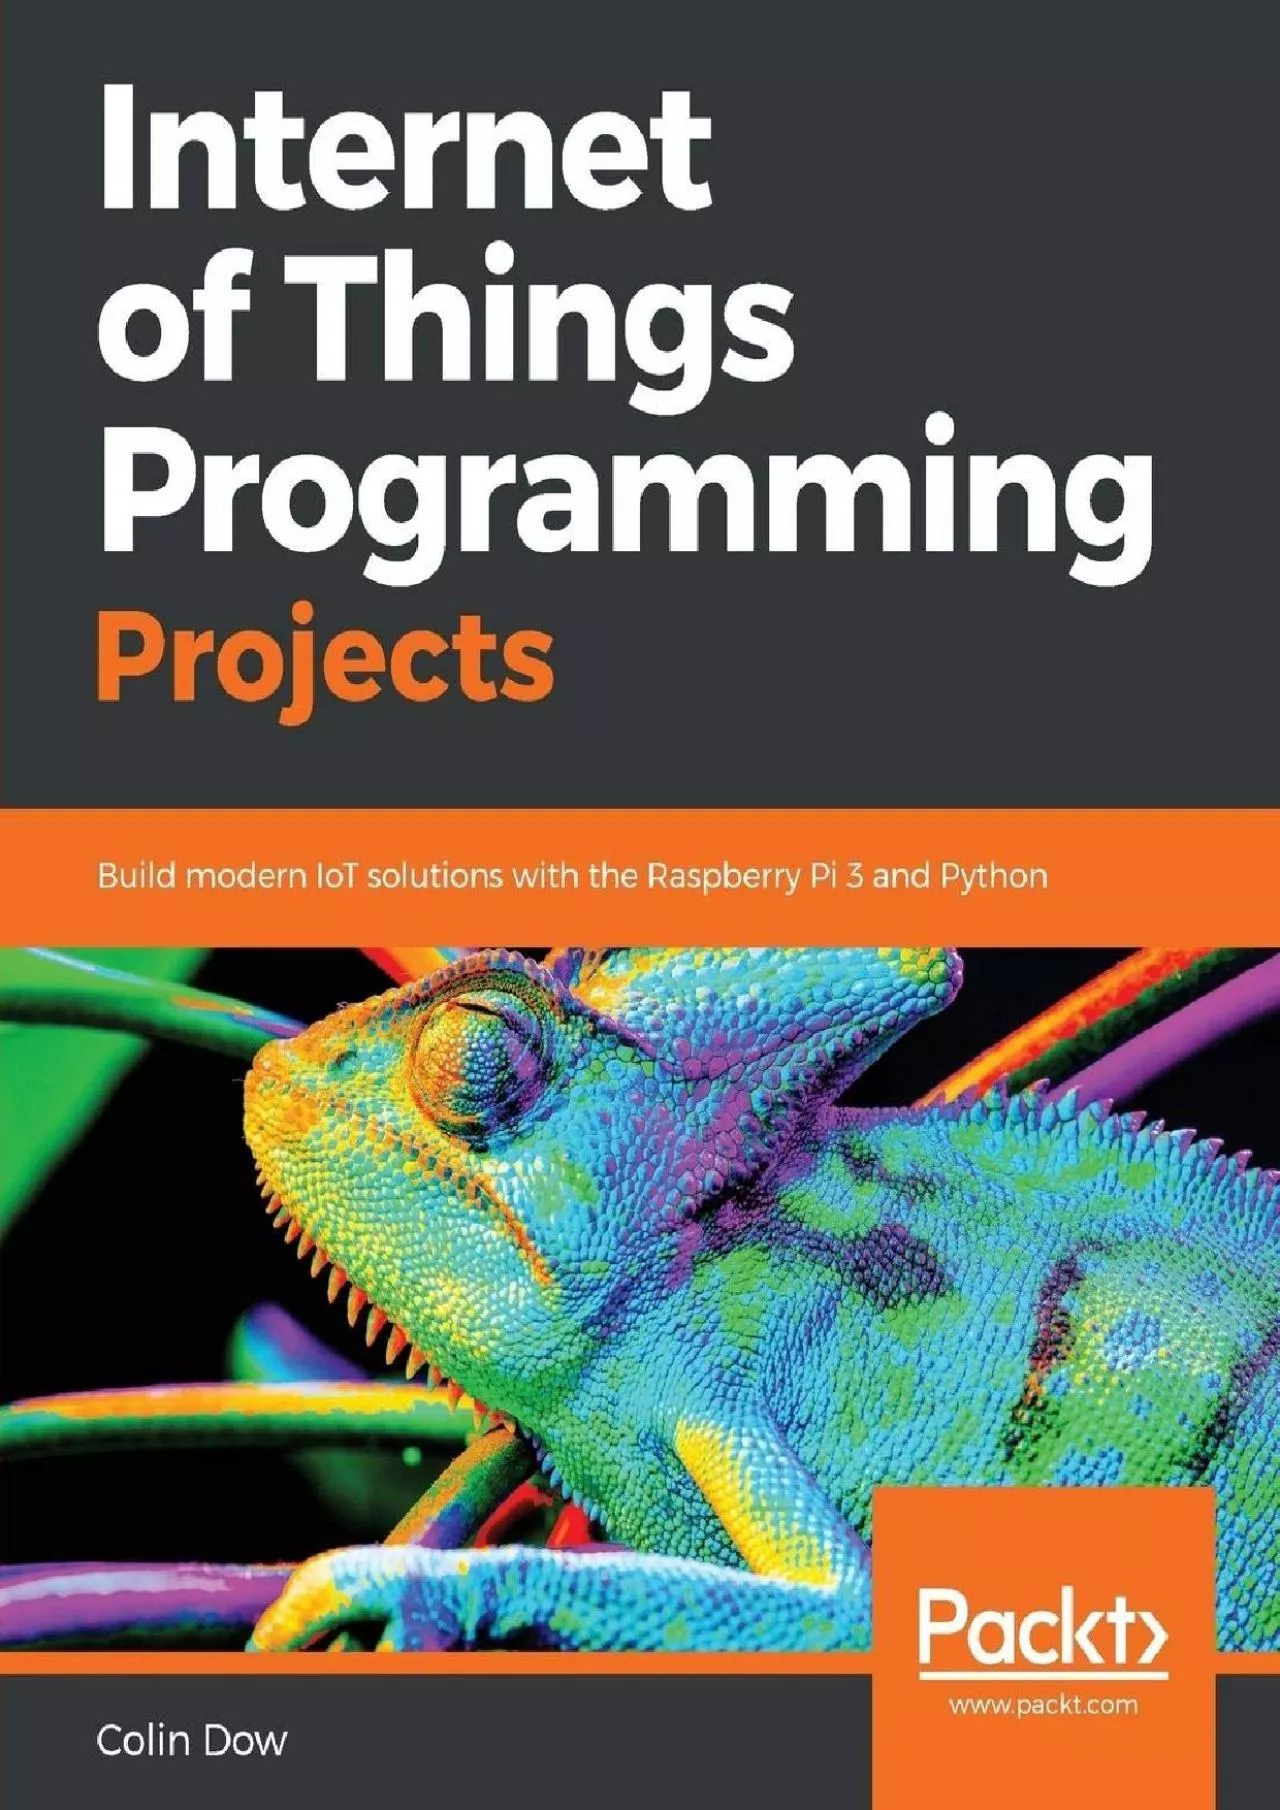 [READING BOOK]-Internet of Things Programming Projects Build modern IoT solutions with